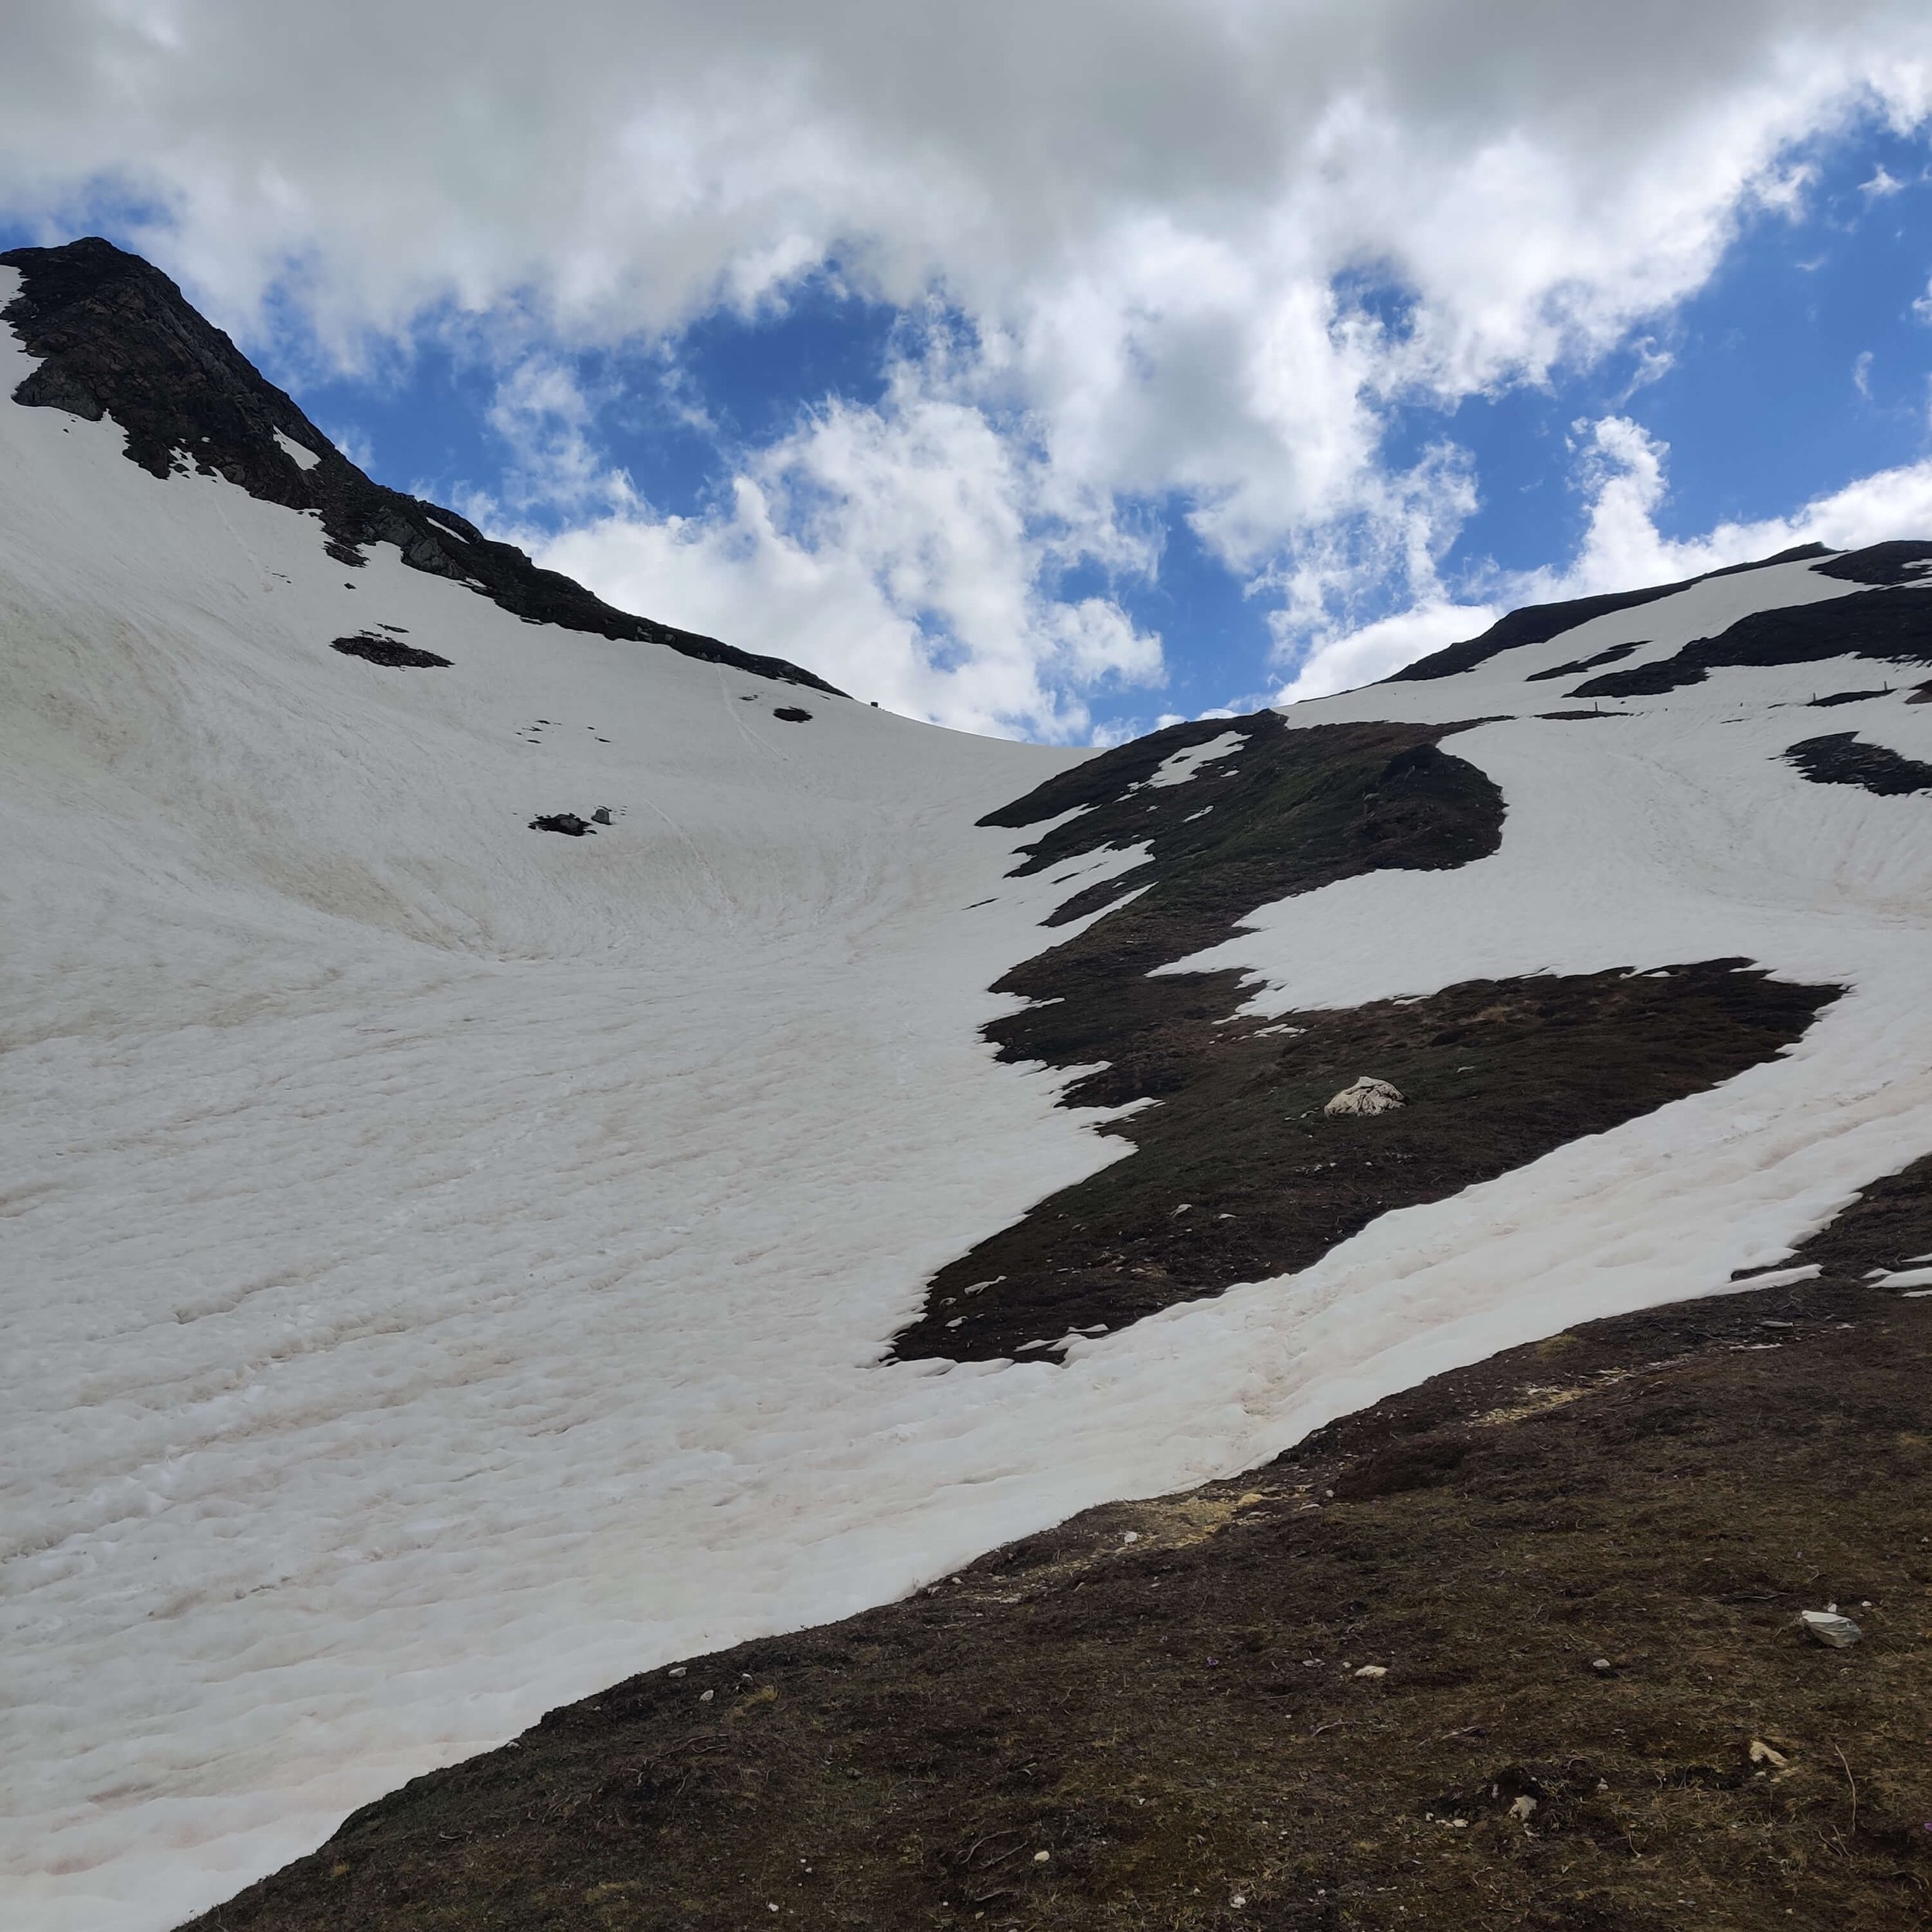 First sighting of Col du Bonhomme from Les Contaminies side_29 May 2022_resized.jpg